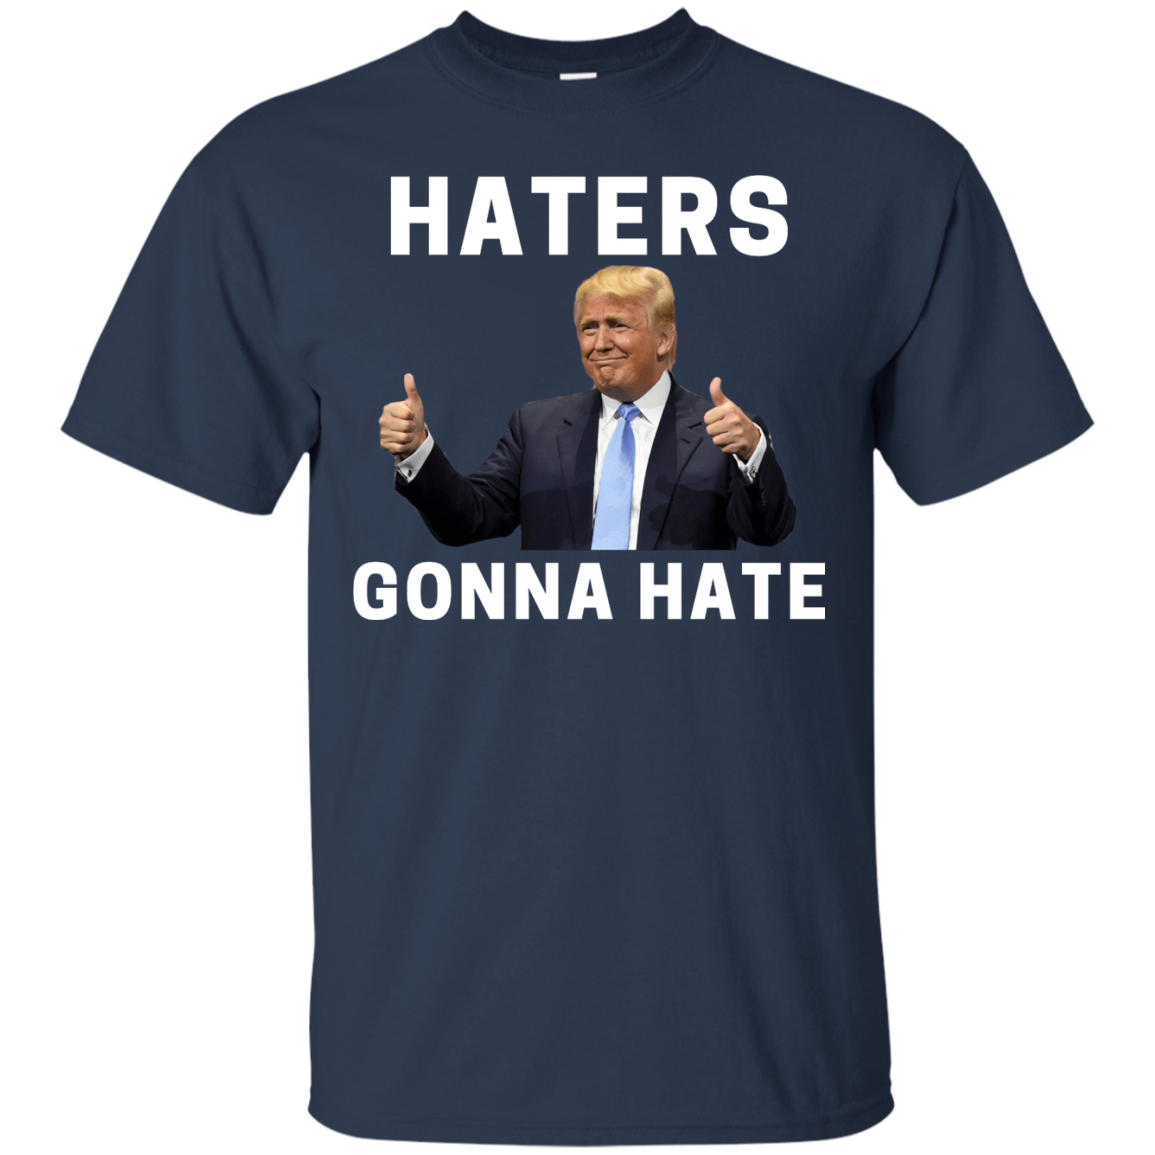 Haters Gonna Hate Trump